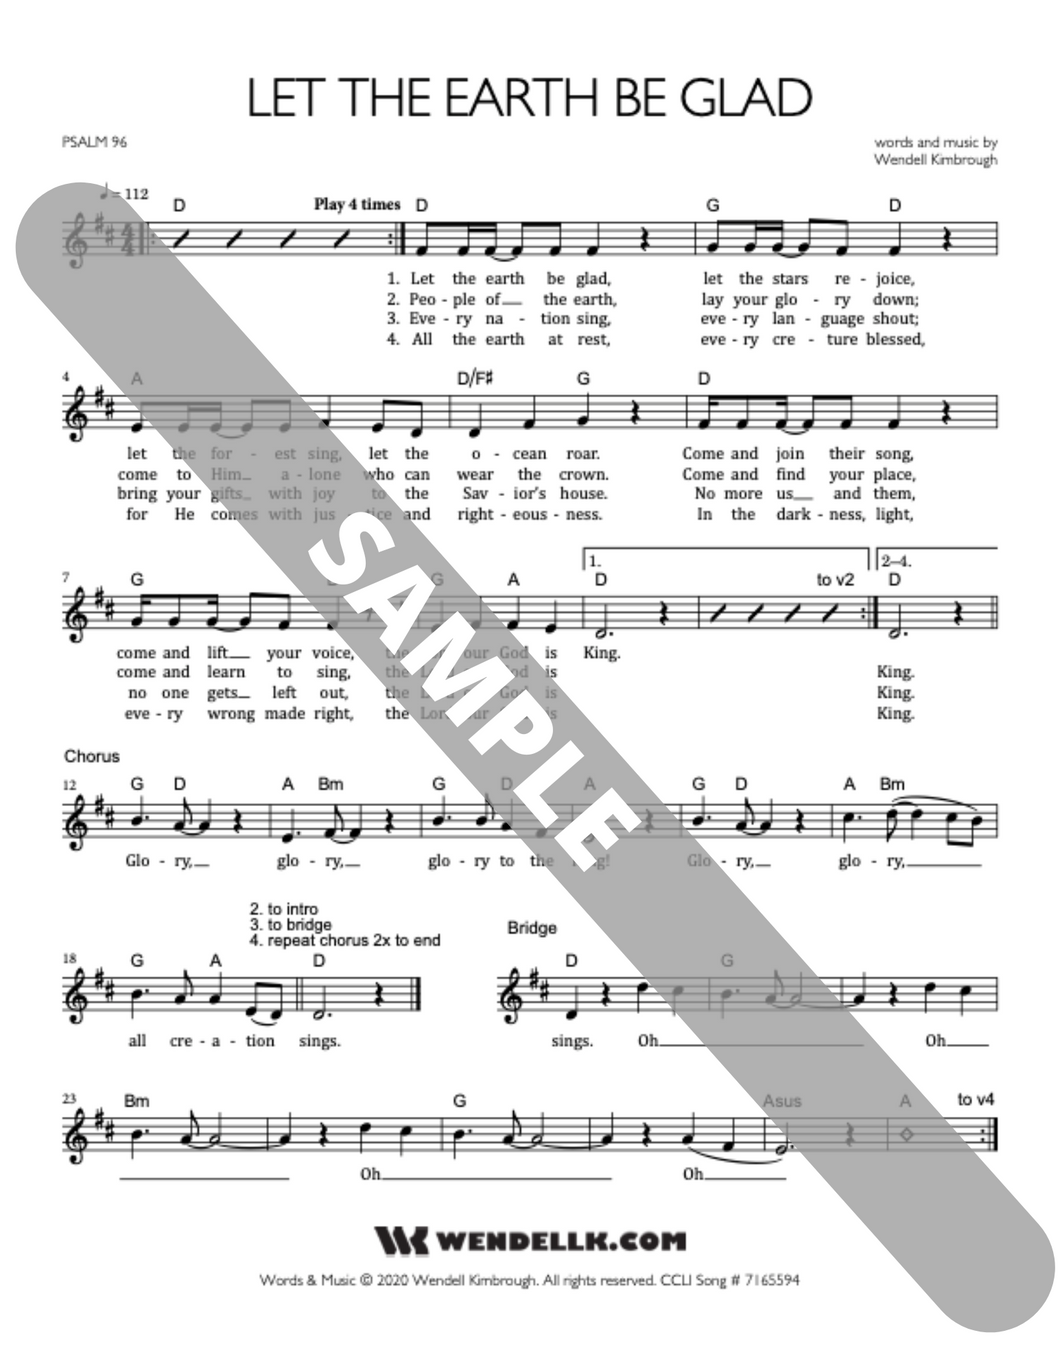 Let the Earth Be Glad (Psalm 96) chart and lead sheet - Digital Download